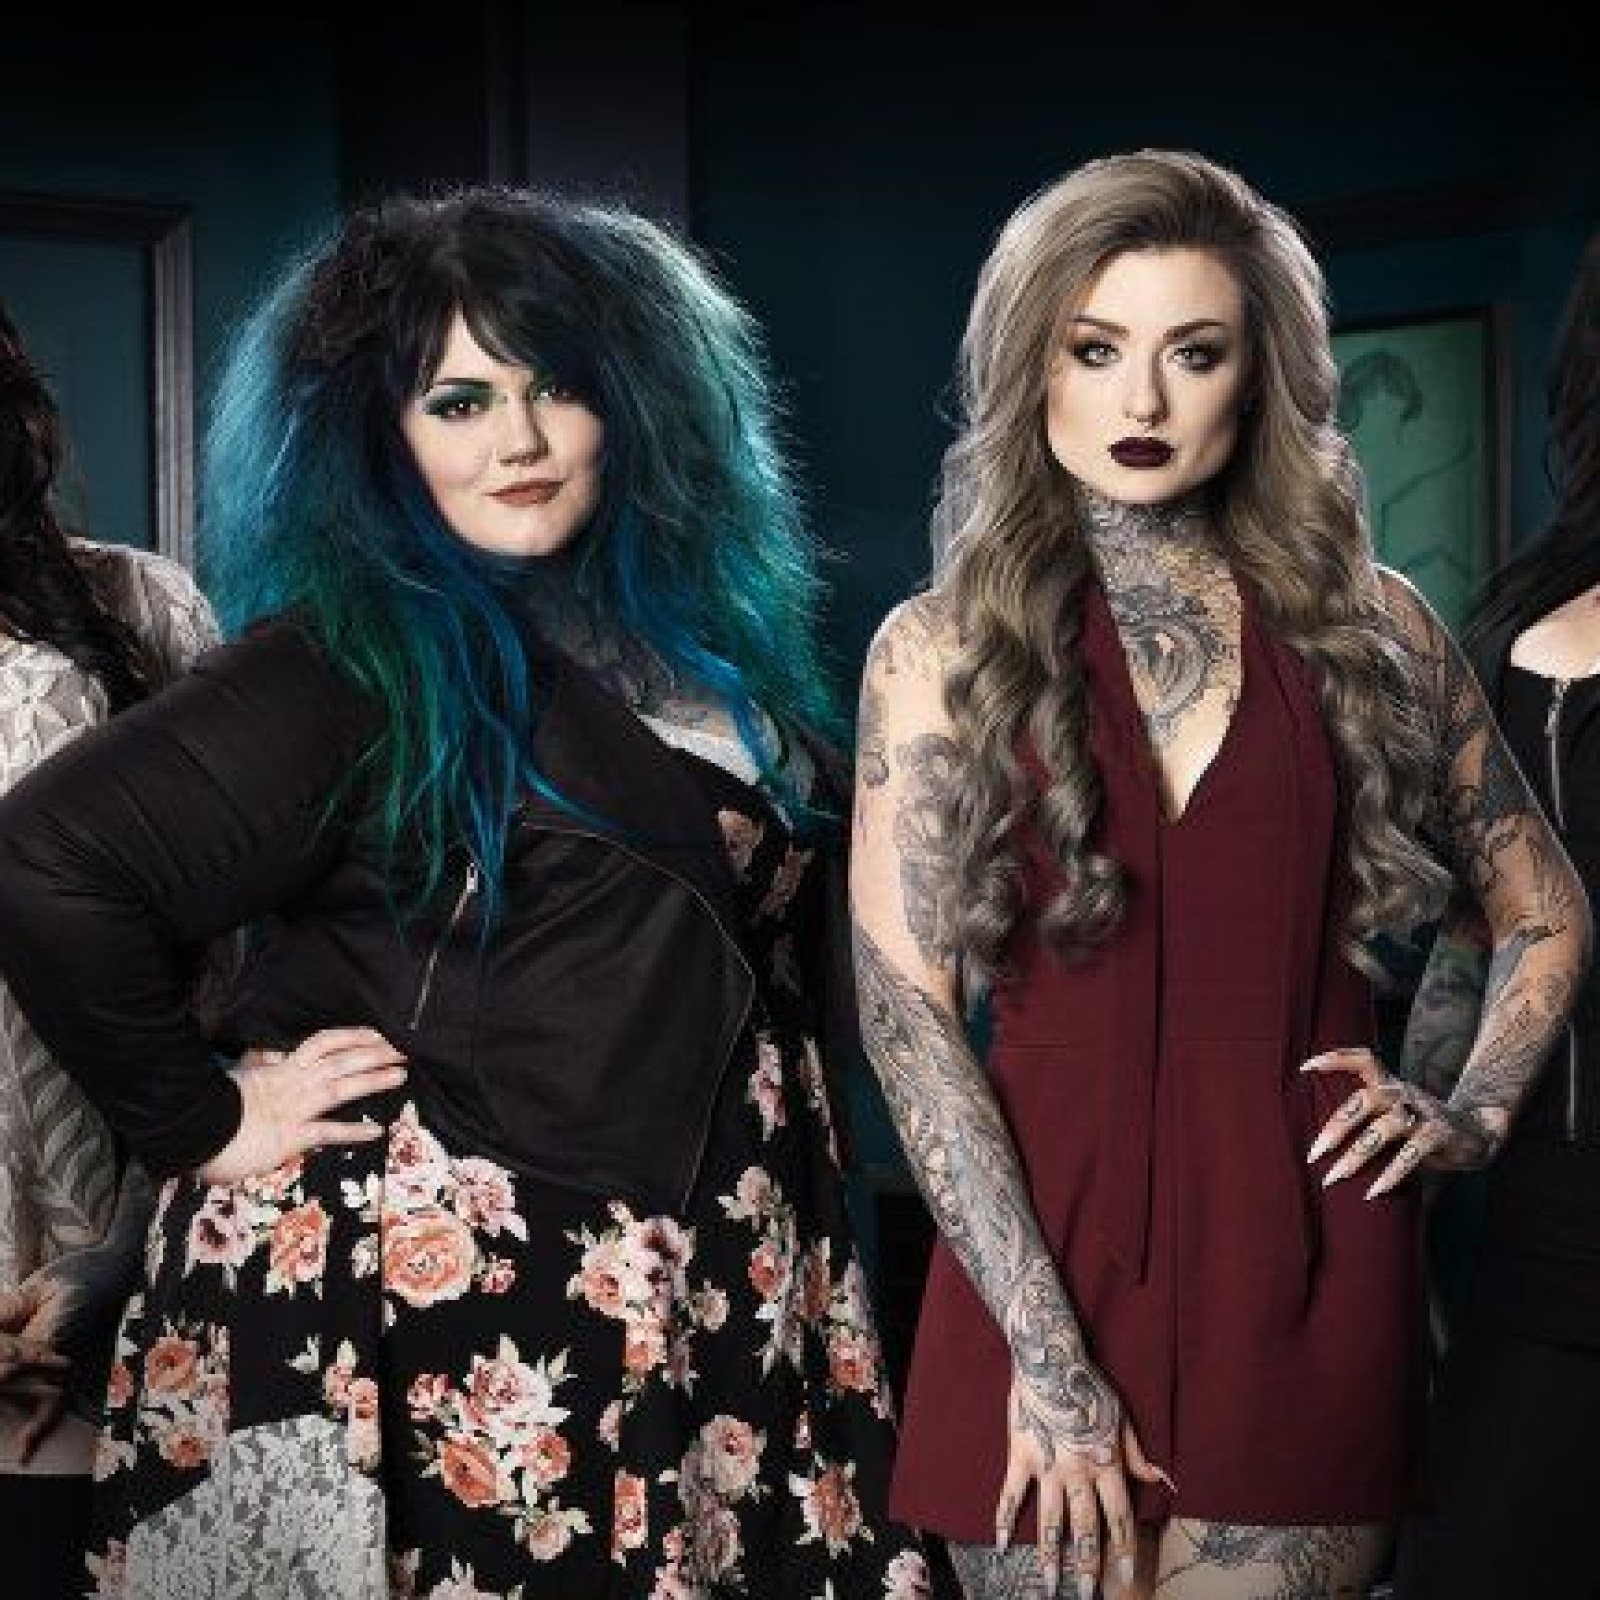 Ink Master Angels': How Ryan And Nikki Make Their Mark As Tattooers